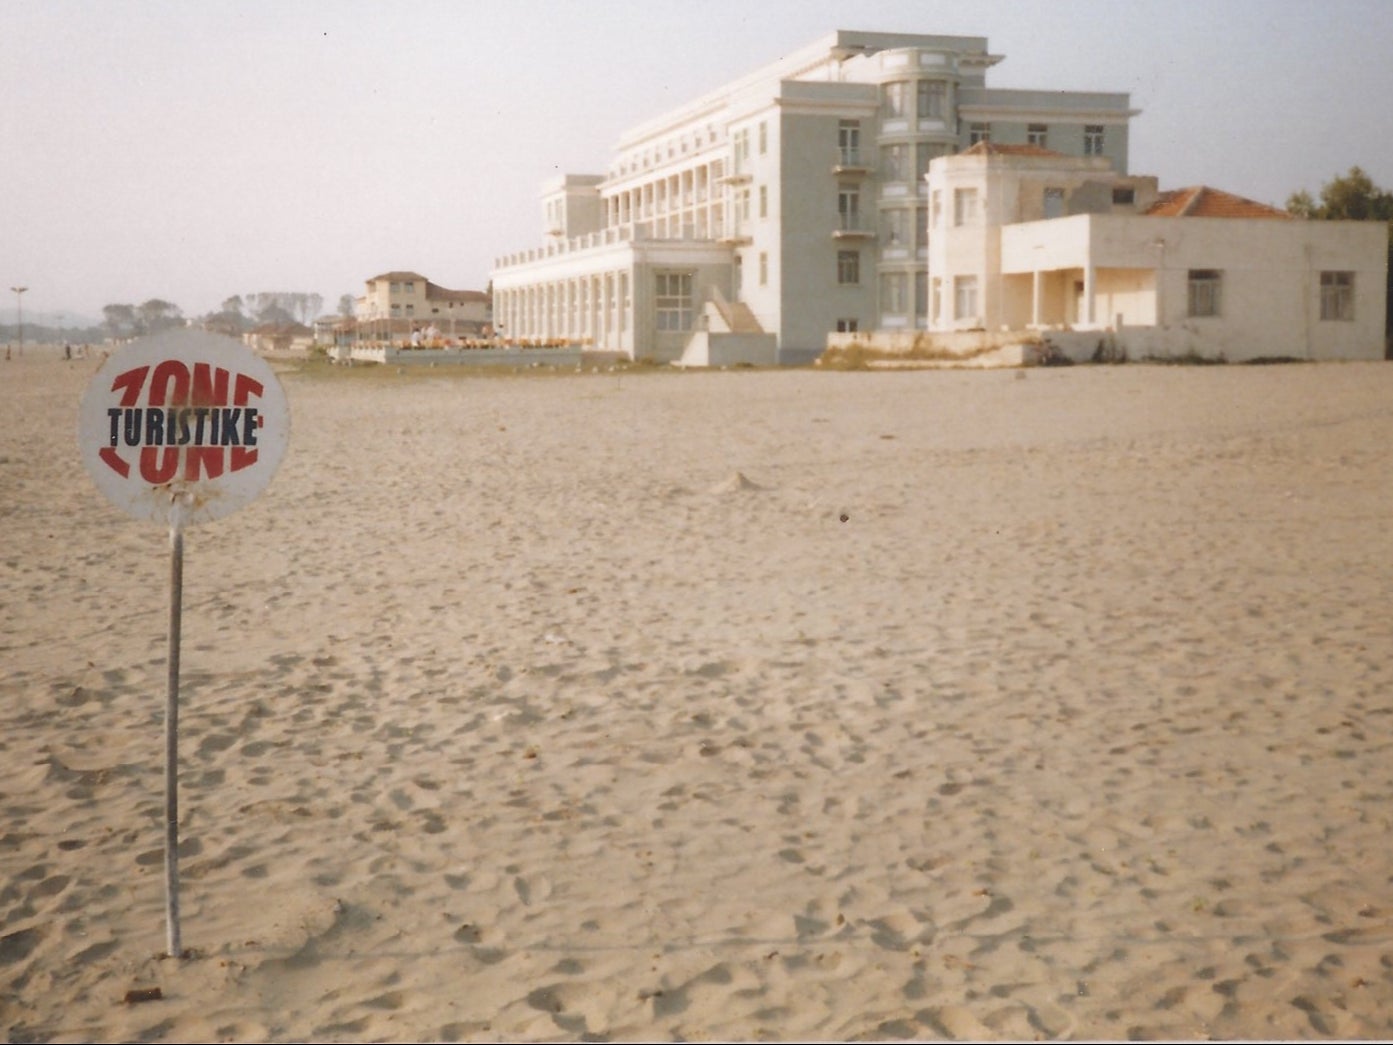 Distant dream: the beach at Durres in 1989, when tourism to Albania was strictly controlled